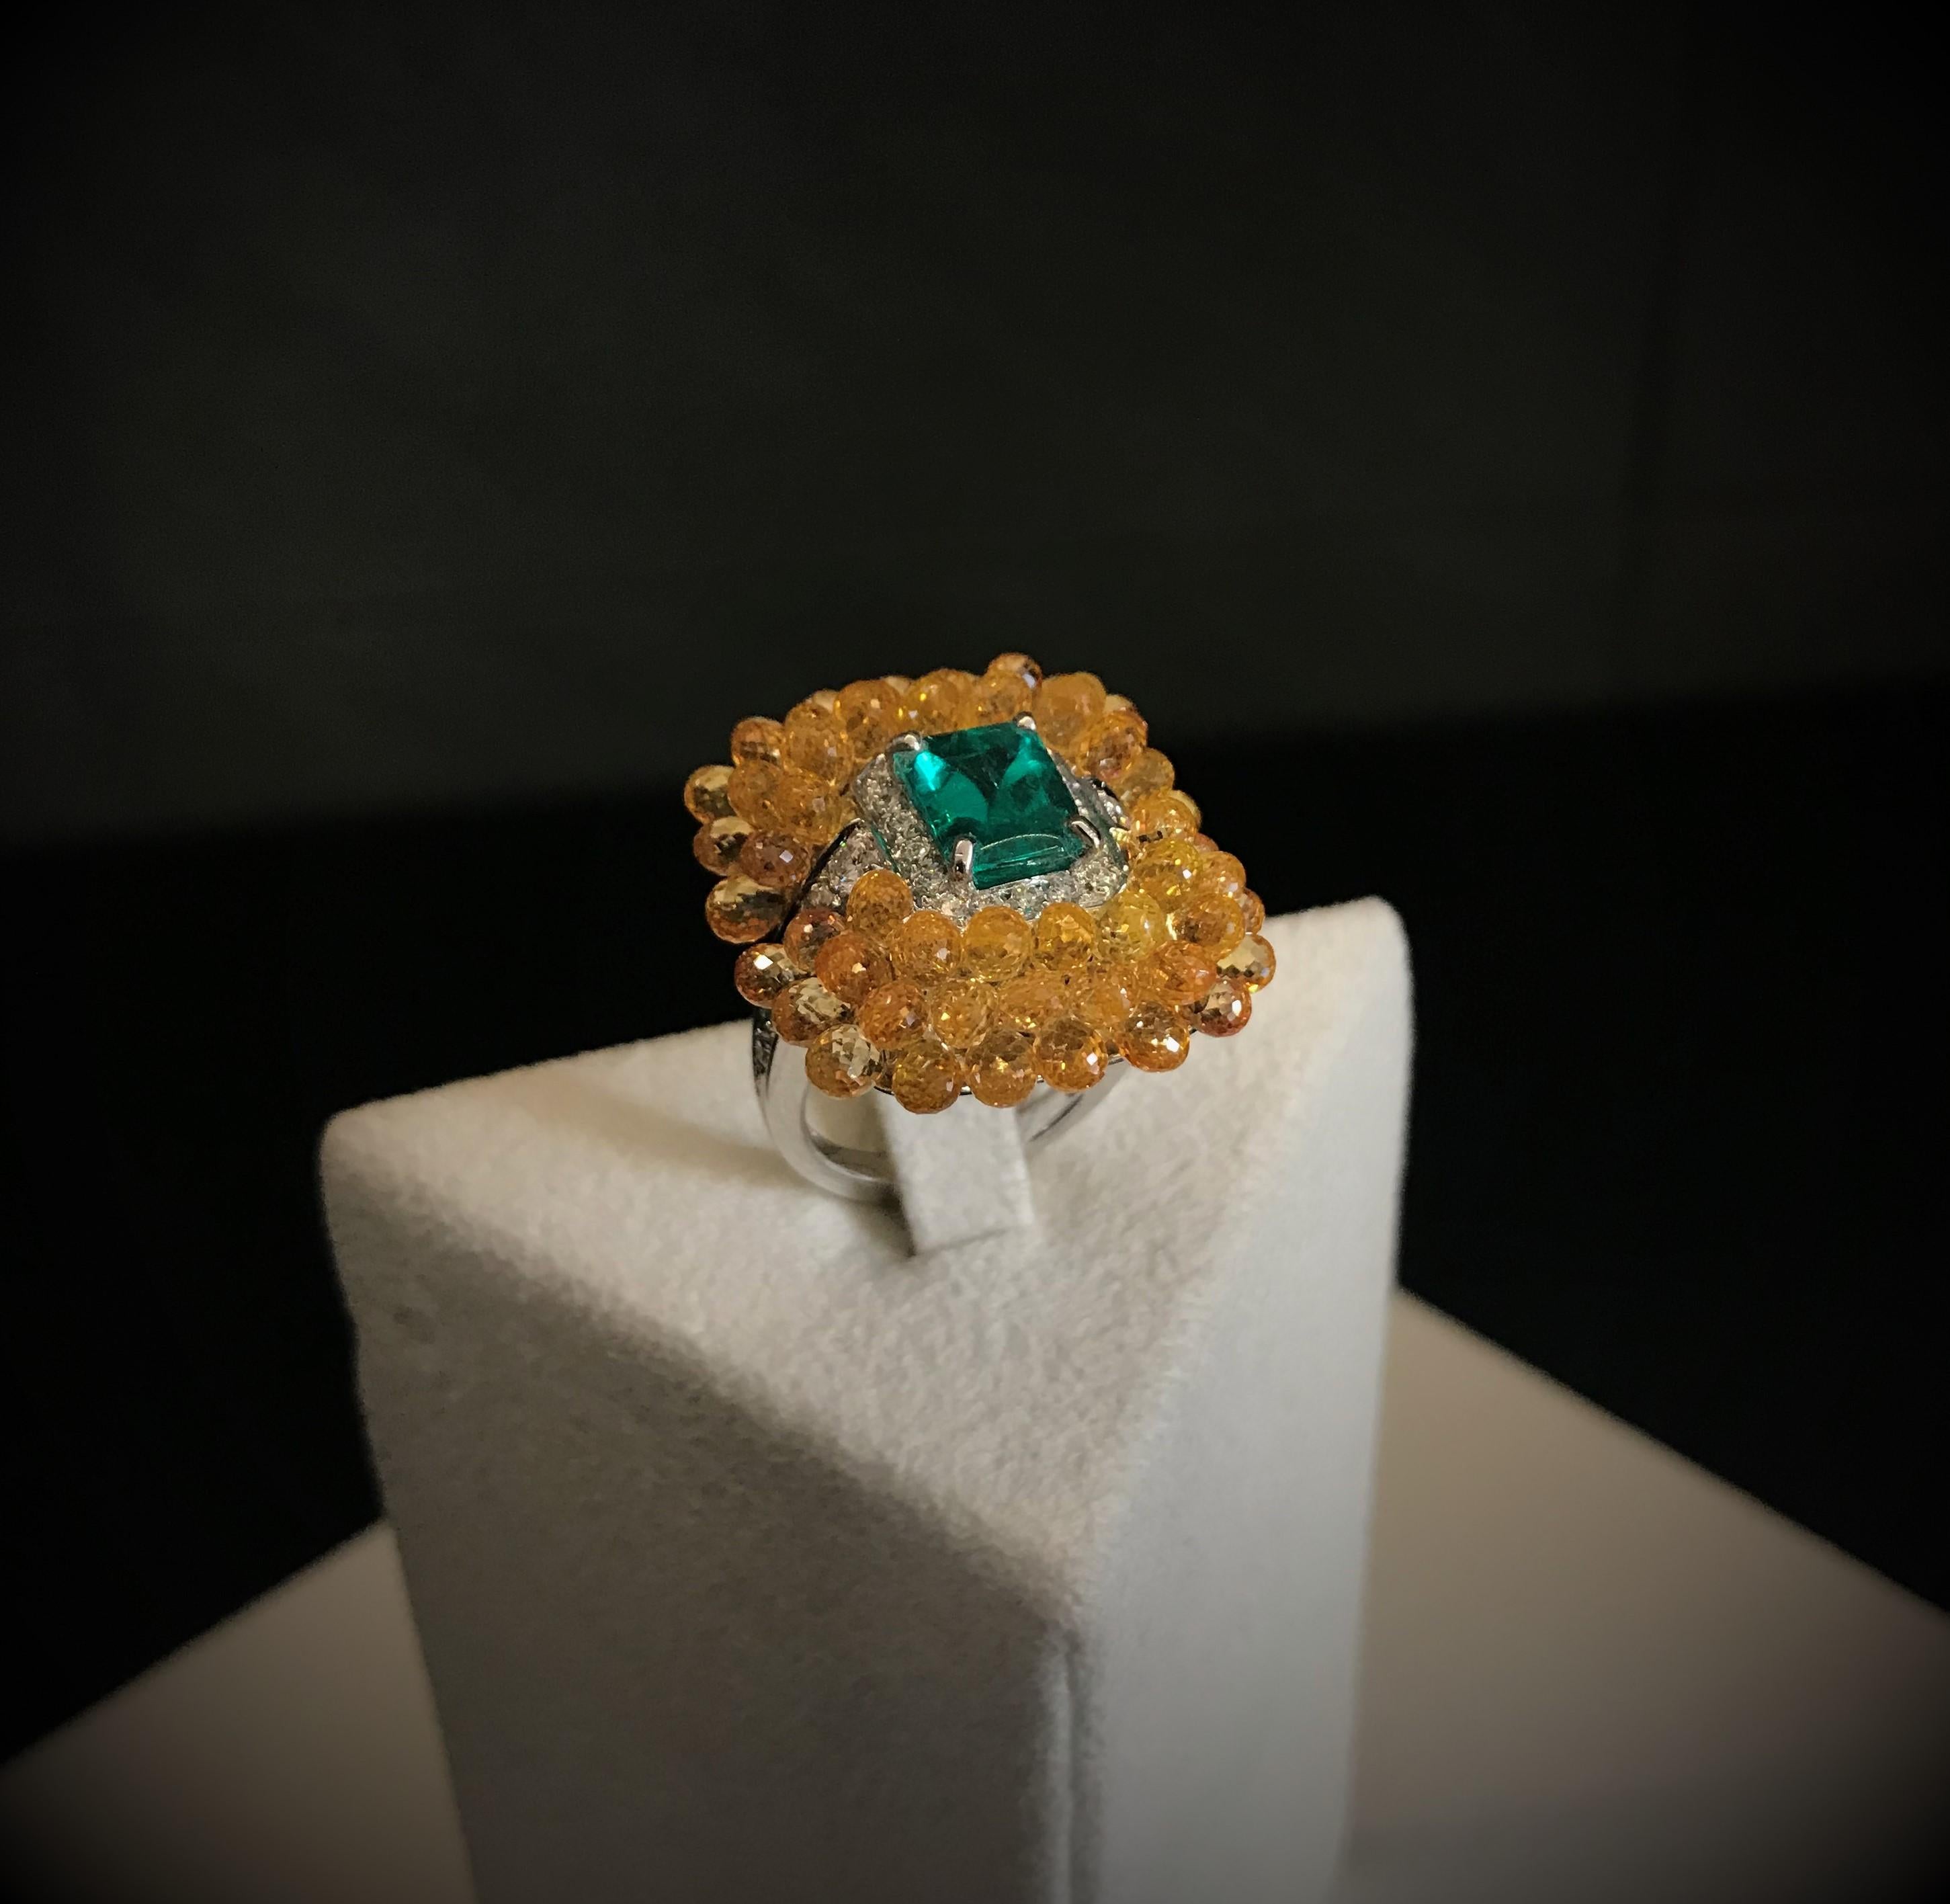 Contemporary Diamond Cocktail Ring 2.09 Ct Cut Emerald and Briolette Cut Yellow Sapphires For Sale